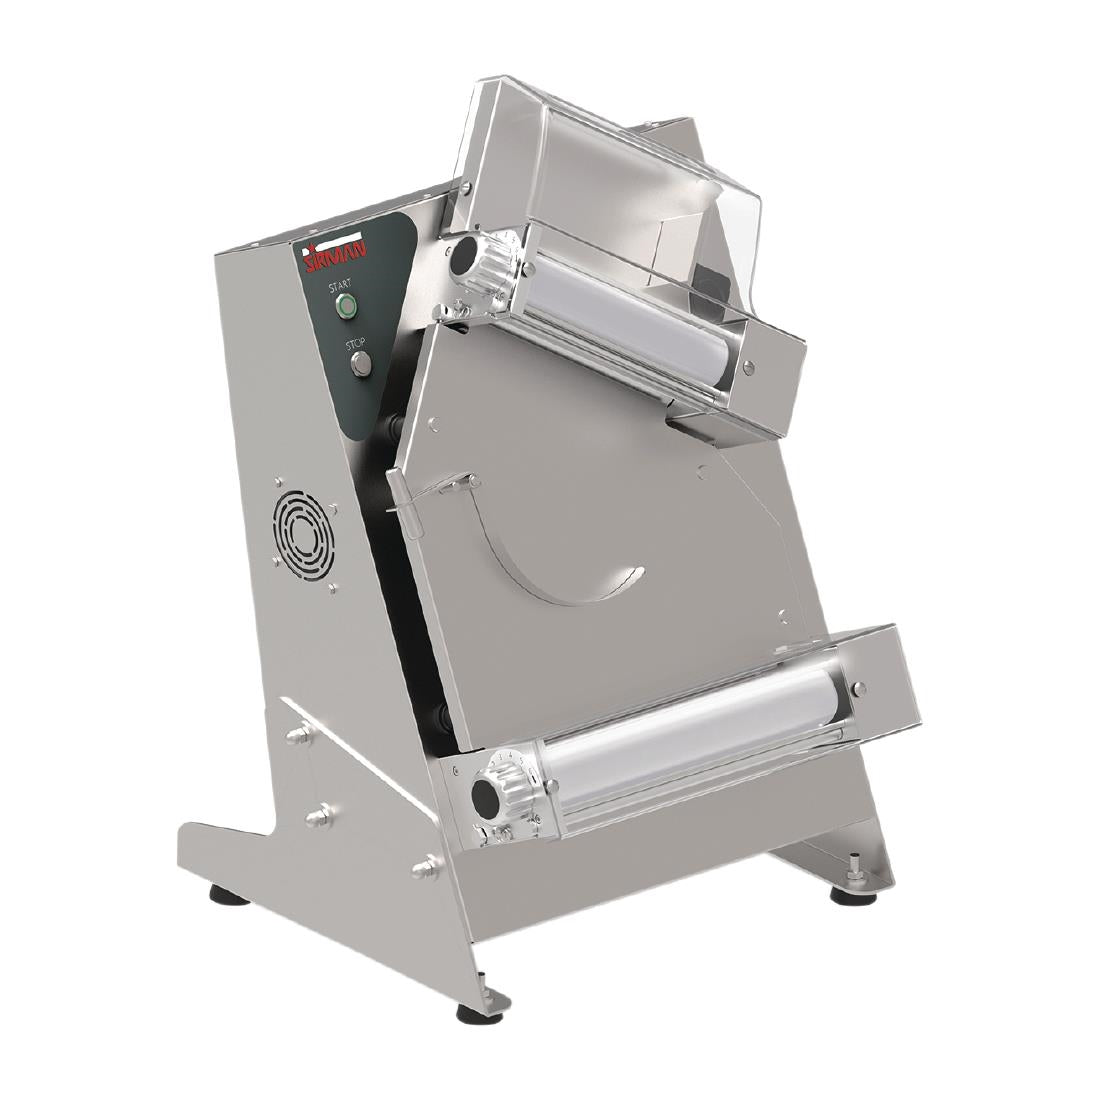 CW421 Sirman Pizza Dough Roller 420 JD Catering Equipment Solutions Ltd